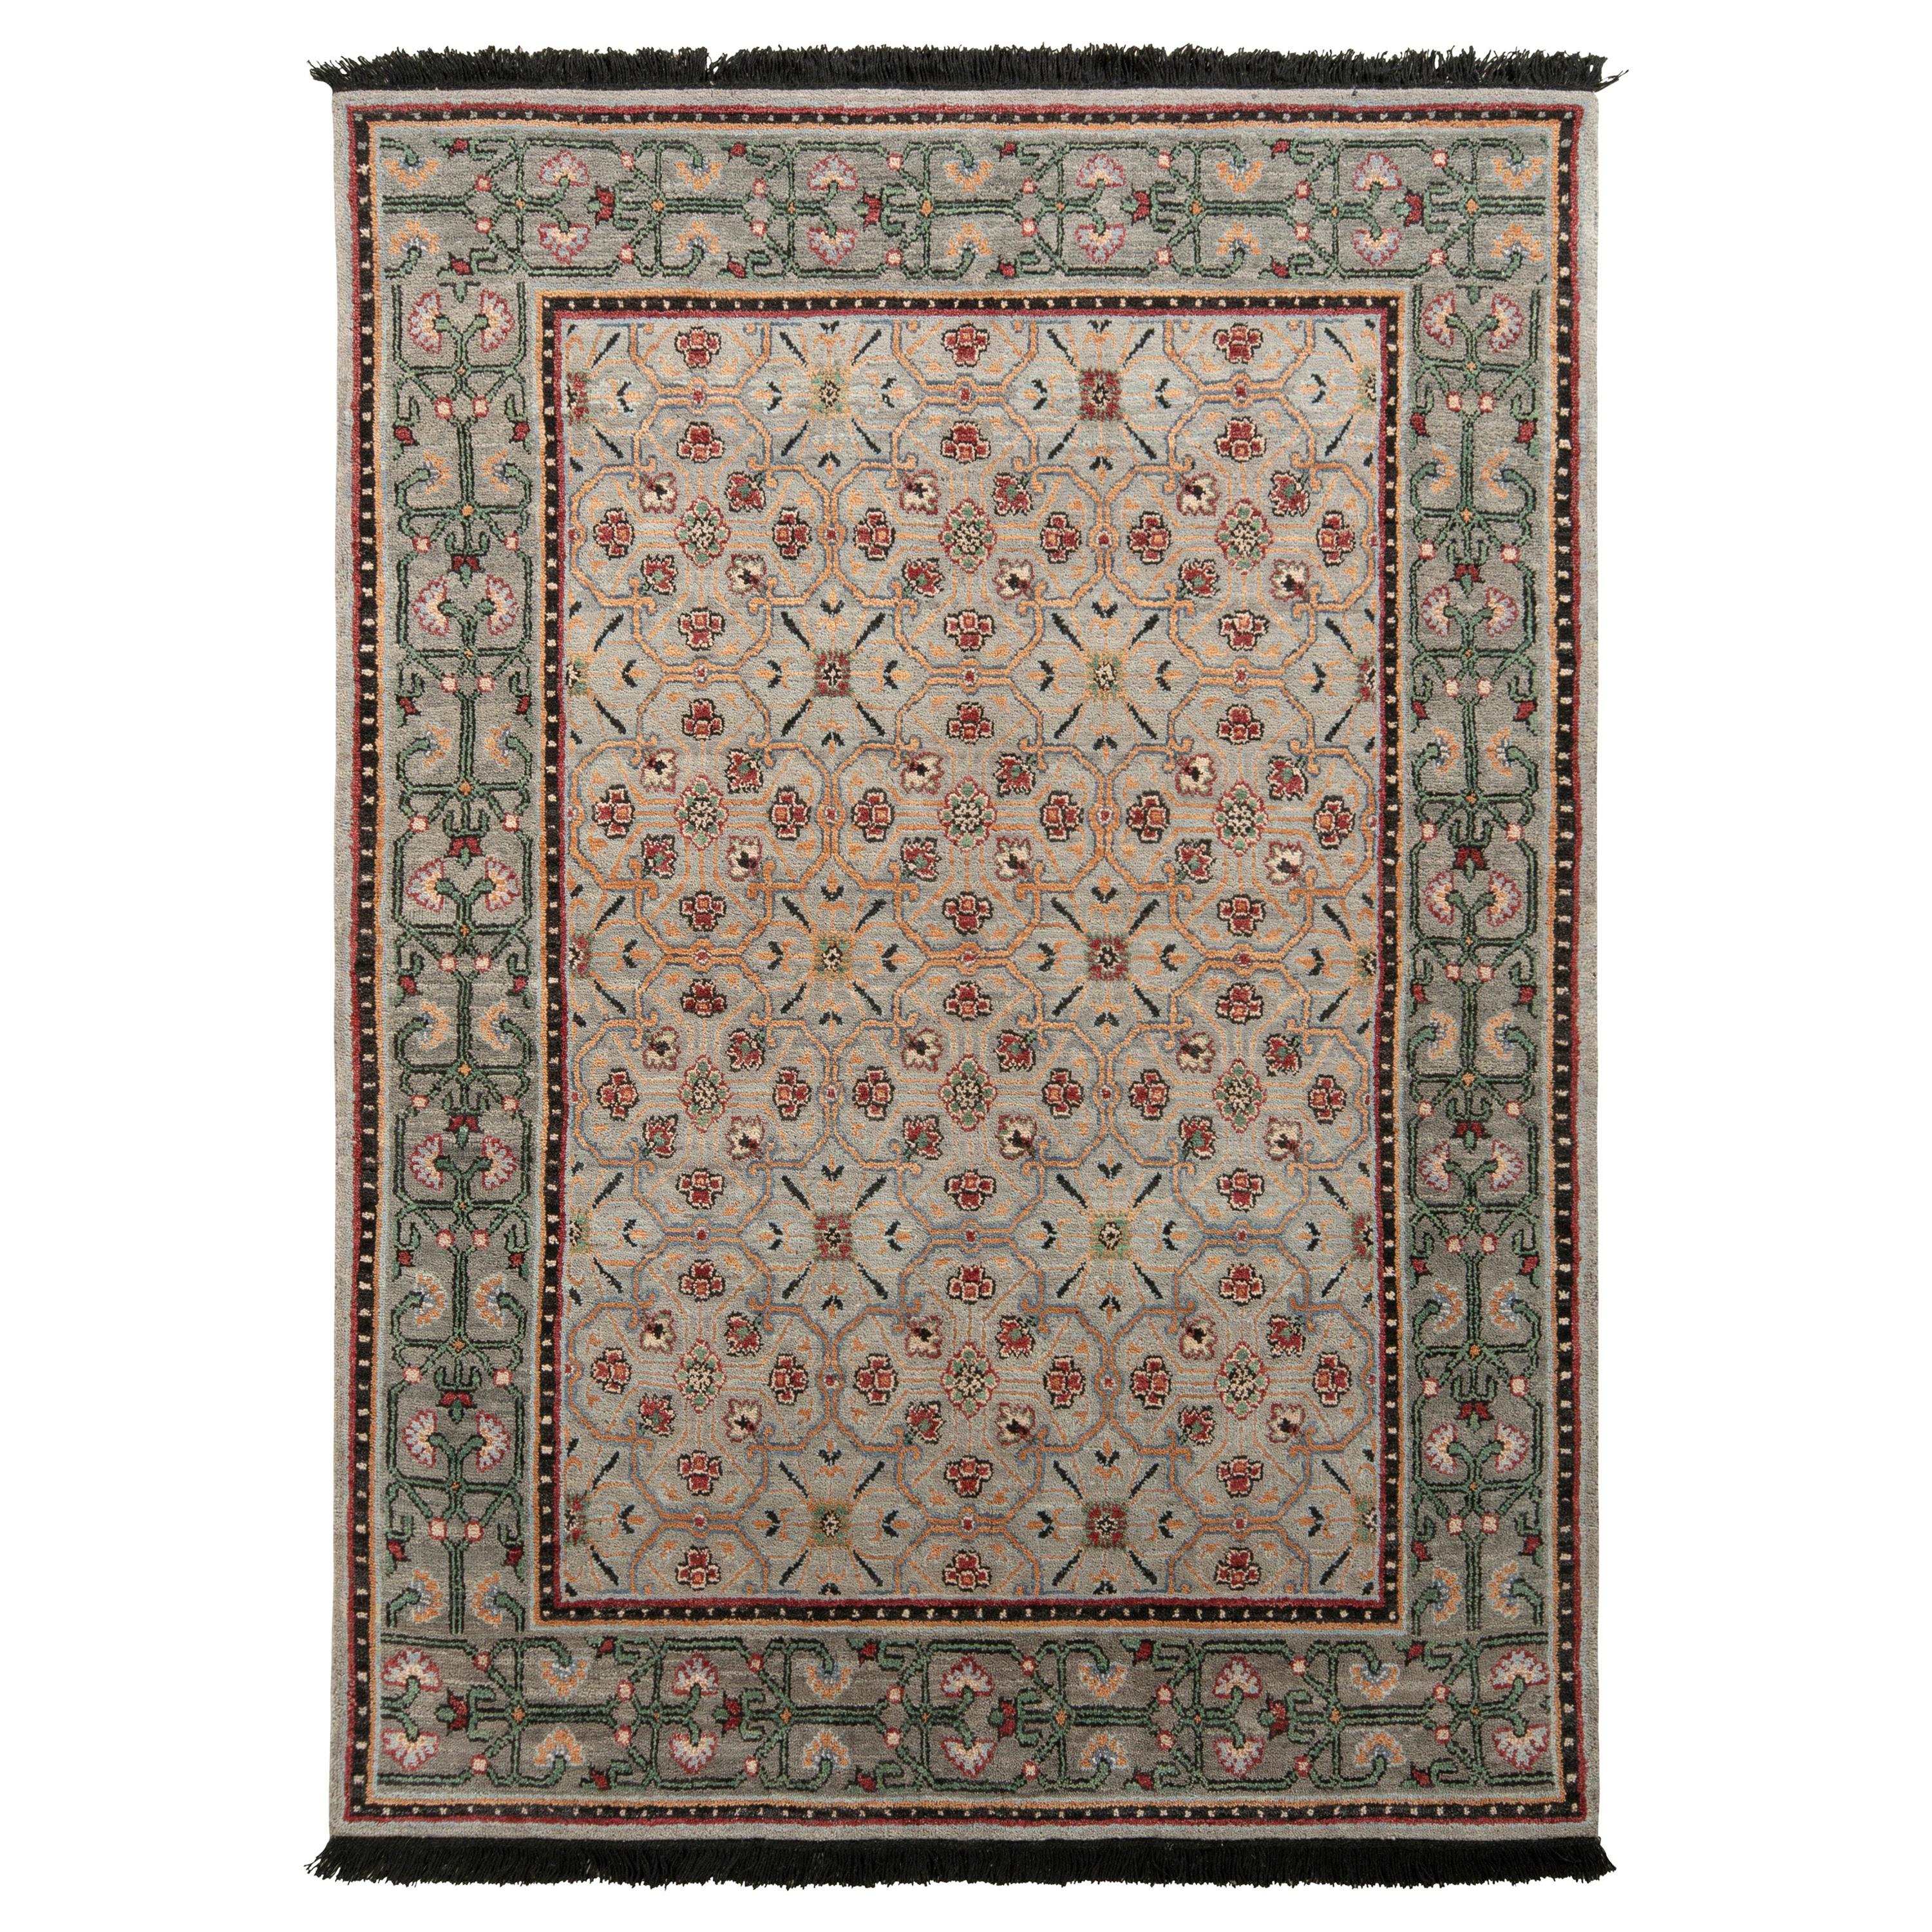 Rug & Kilim's Transitional Style Rug in Green and Blue All over Floral Pattern (tapis de style transitionnel à motifs floraux verts et bleus)